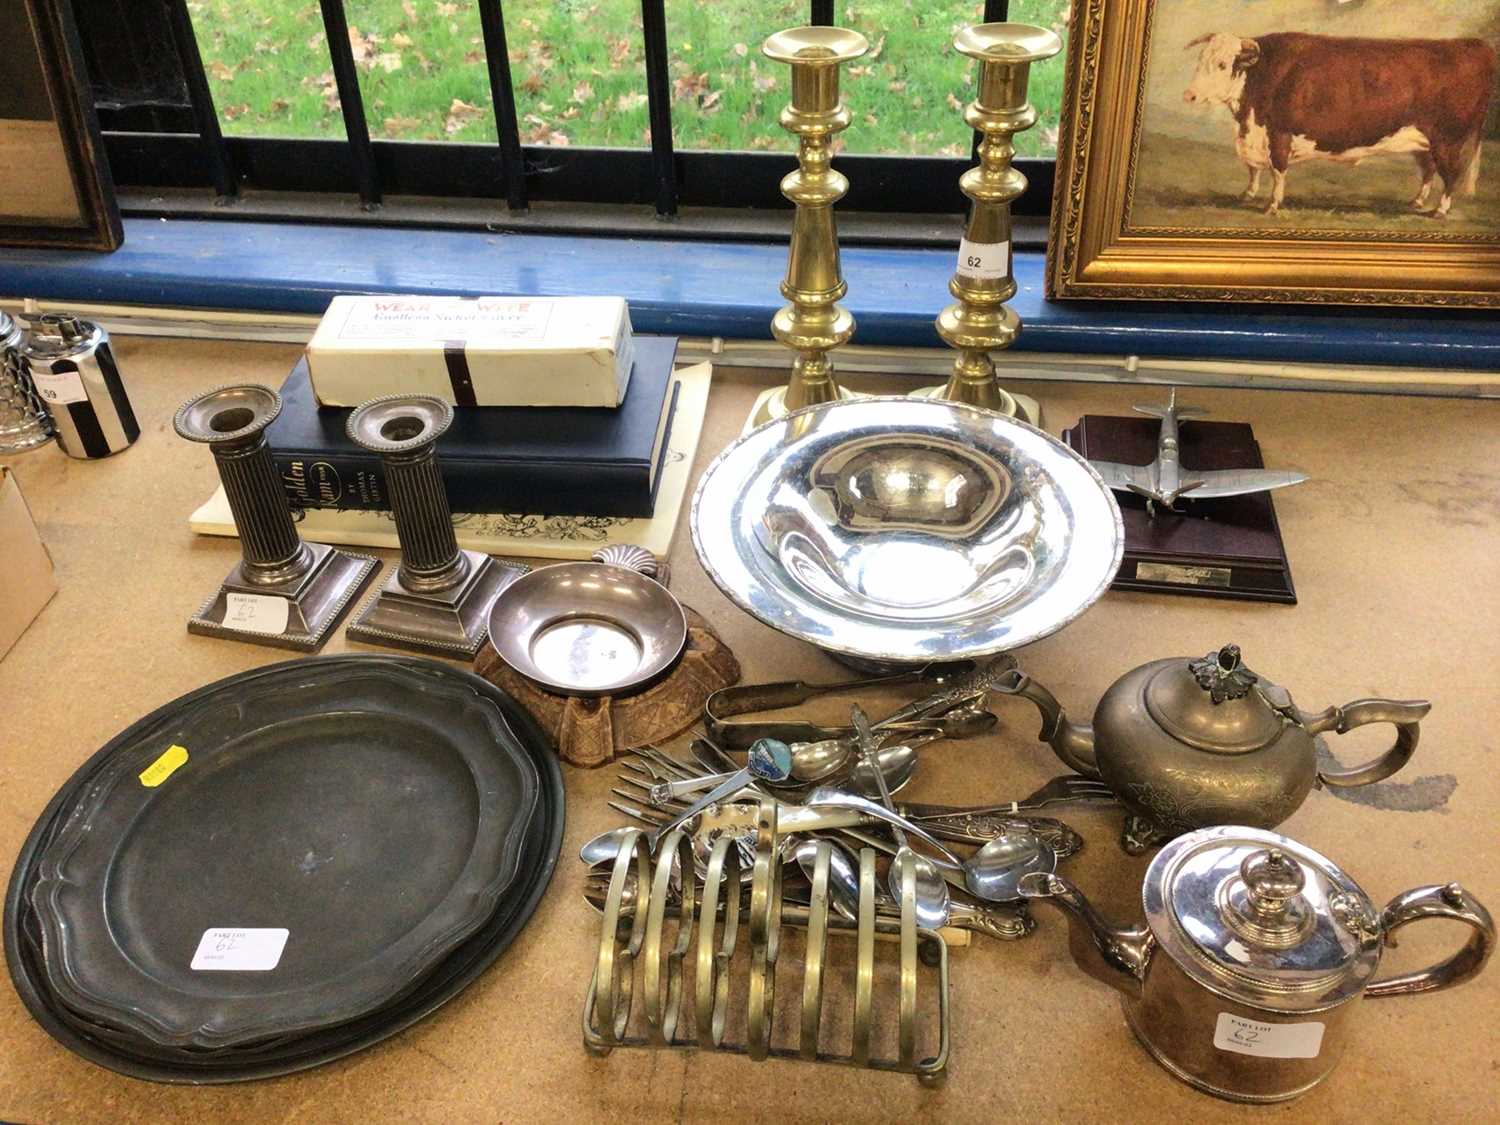 Lot 62 - Three pewter dishes, together with a pair of brass candlesticks and a pair of silver plated candlesticks